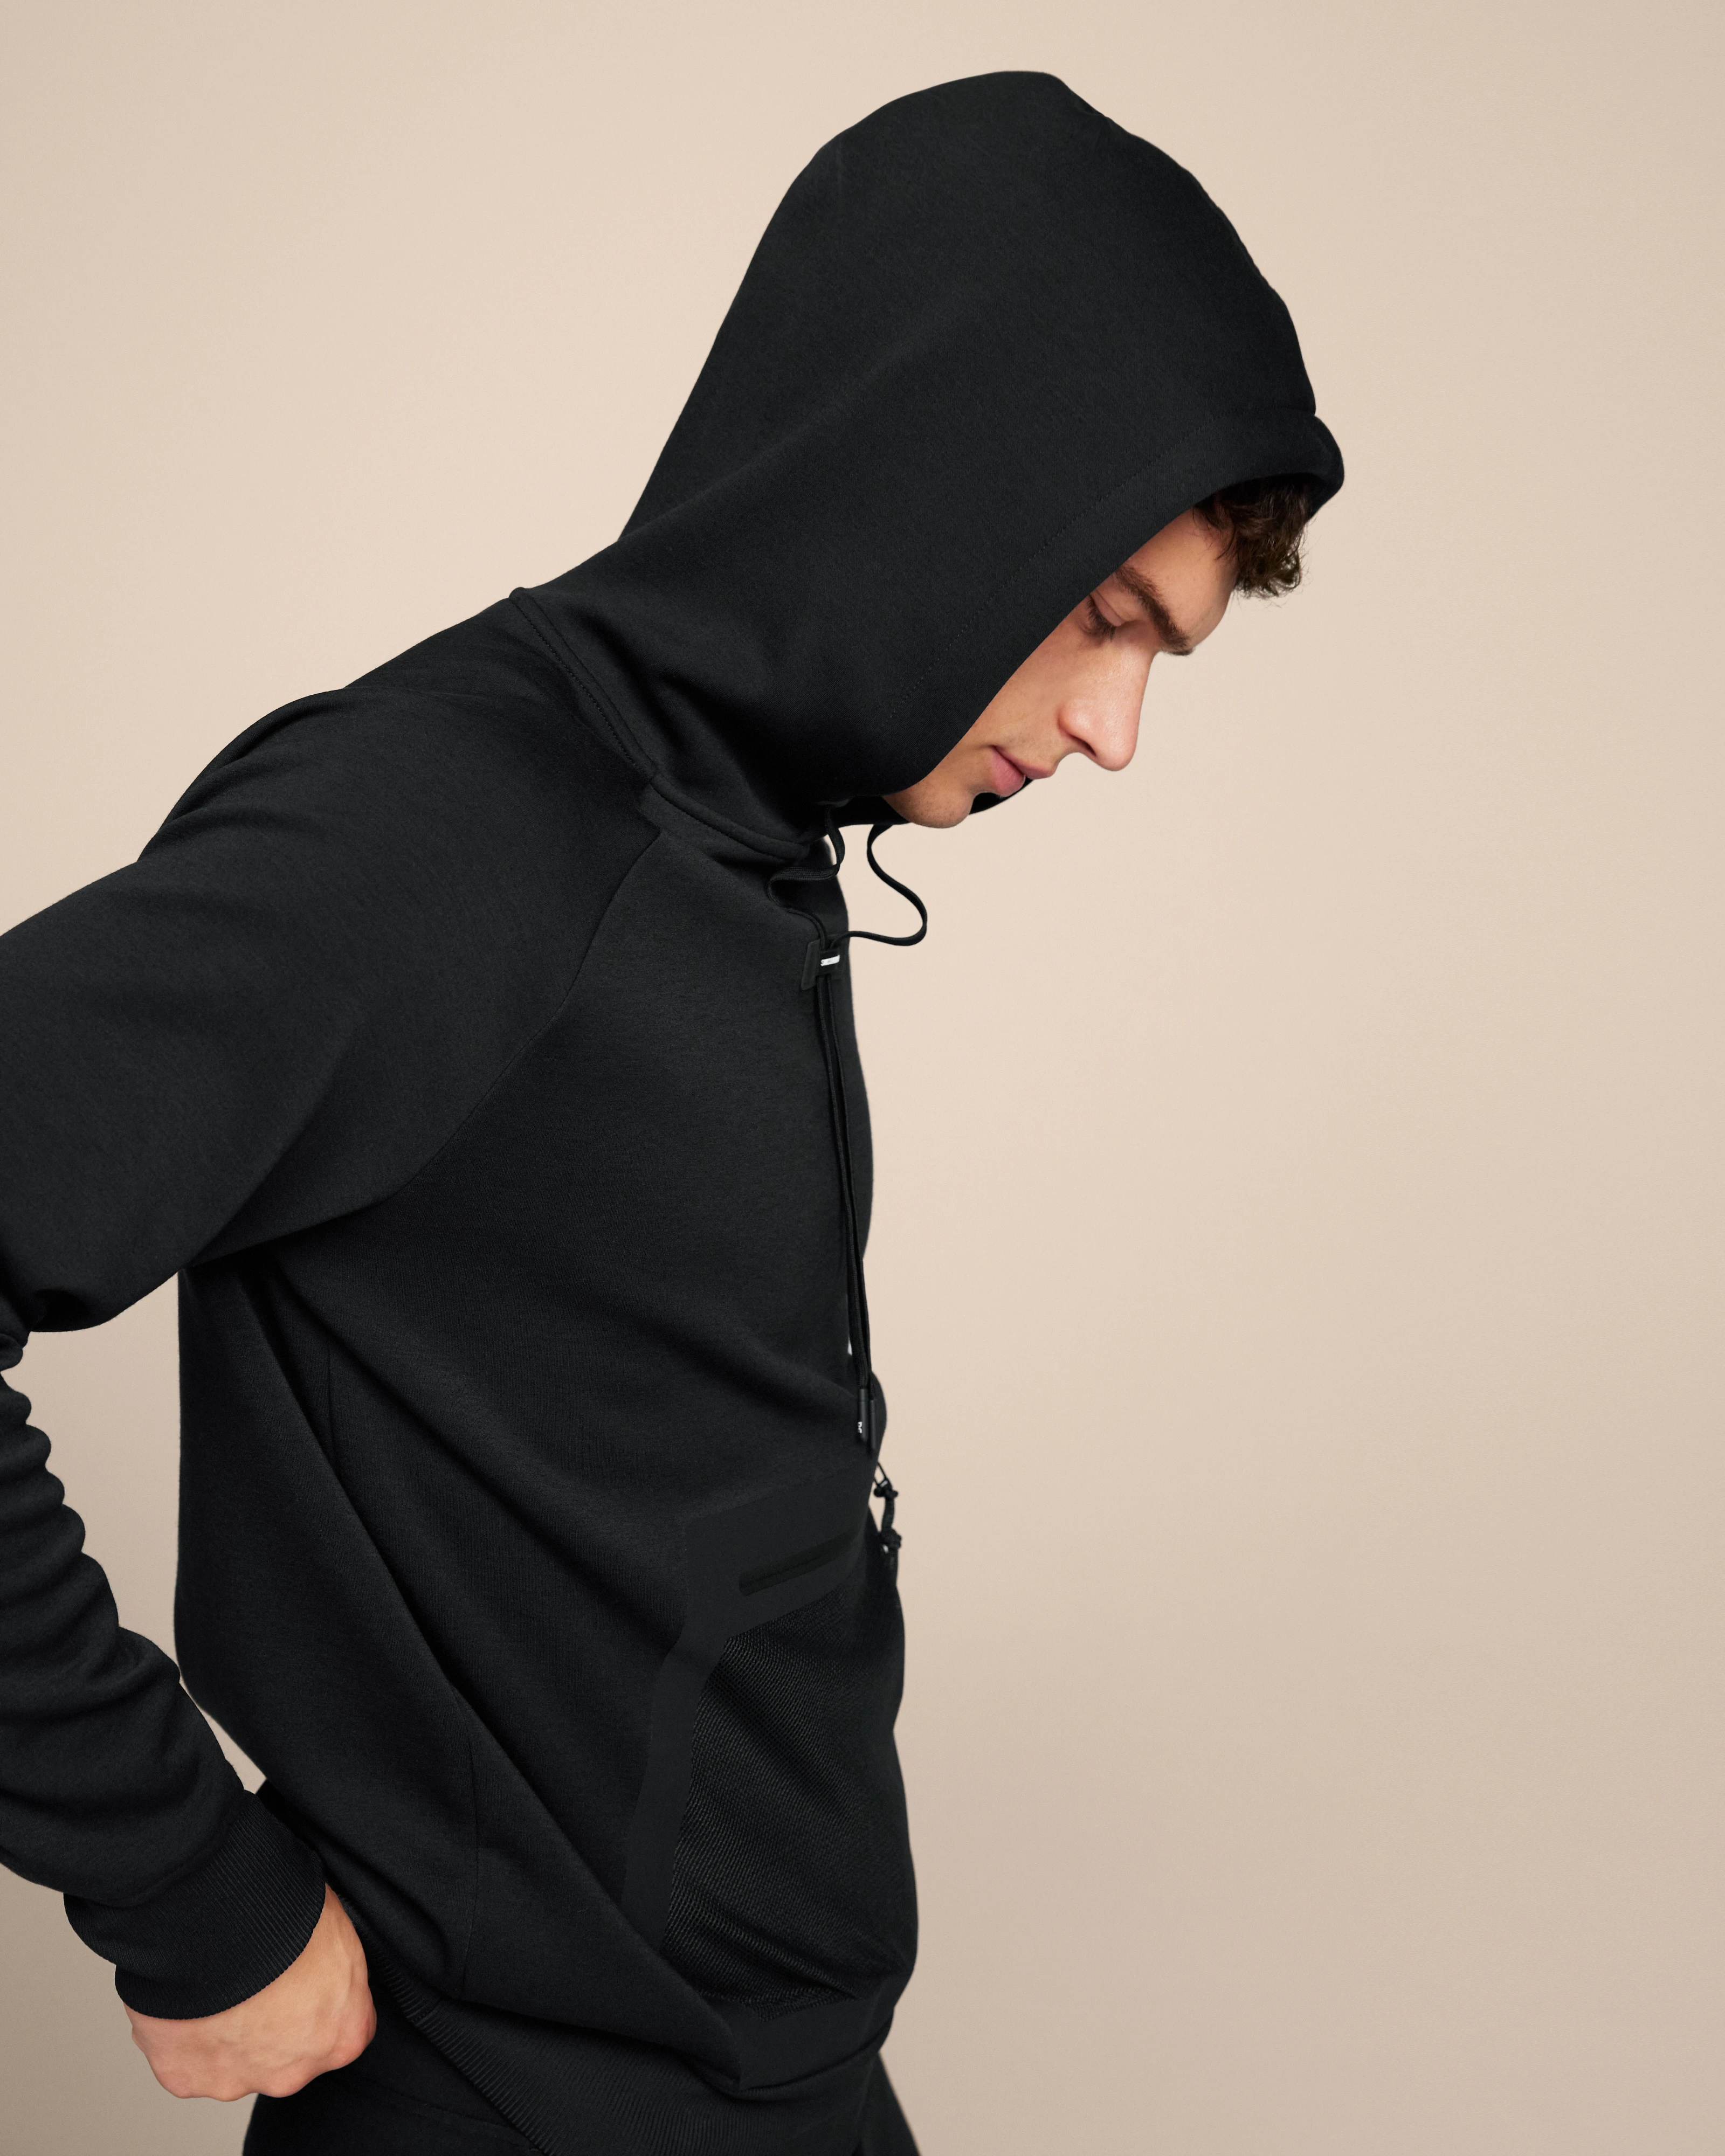 Buy Men's Black Hoodie with Minimalistic Charging Design,Sweatshirt with  Ultimate Comfort Come with Cotton Material (S) at